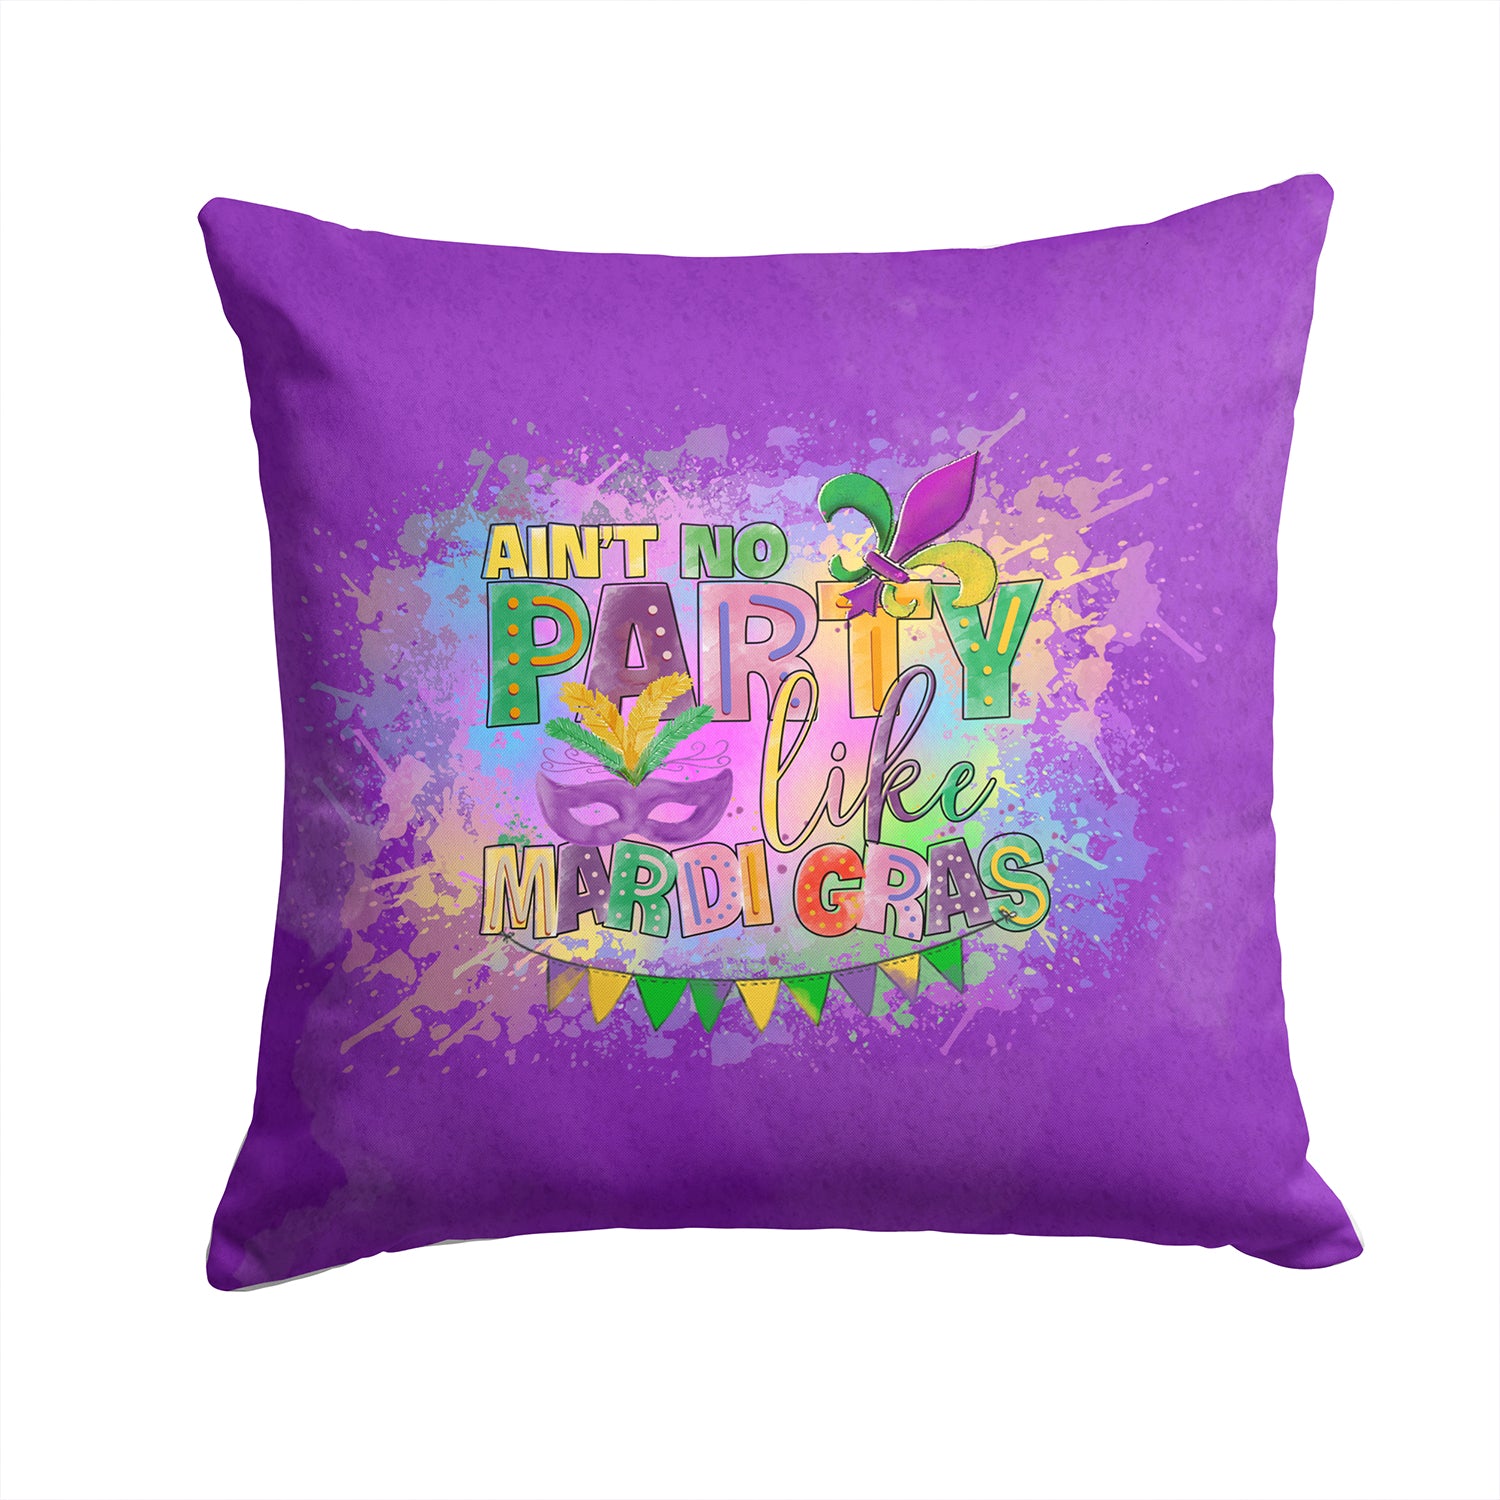 Buy this Ain't No Party Like Mardi Gras Fabric Decorative Pillow